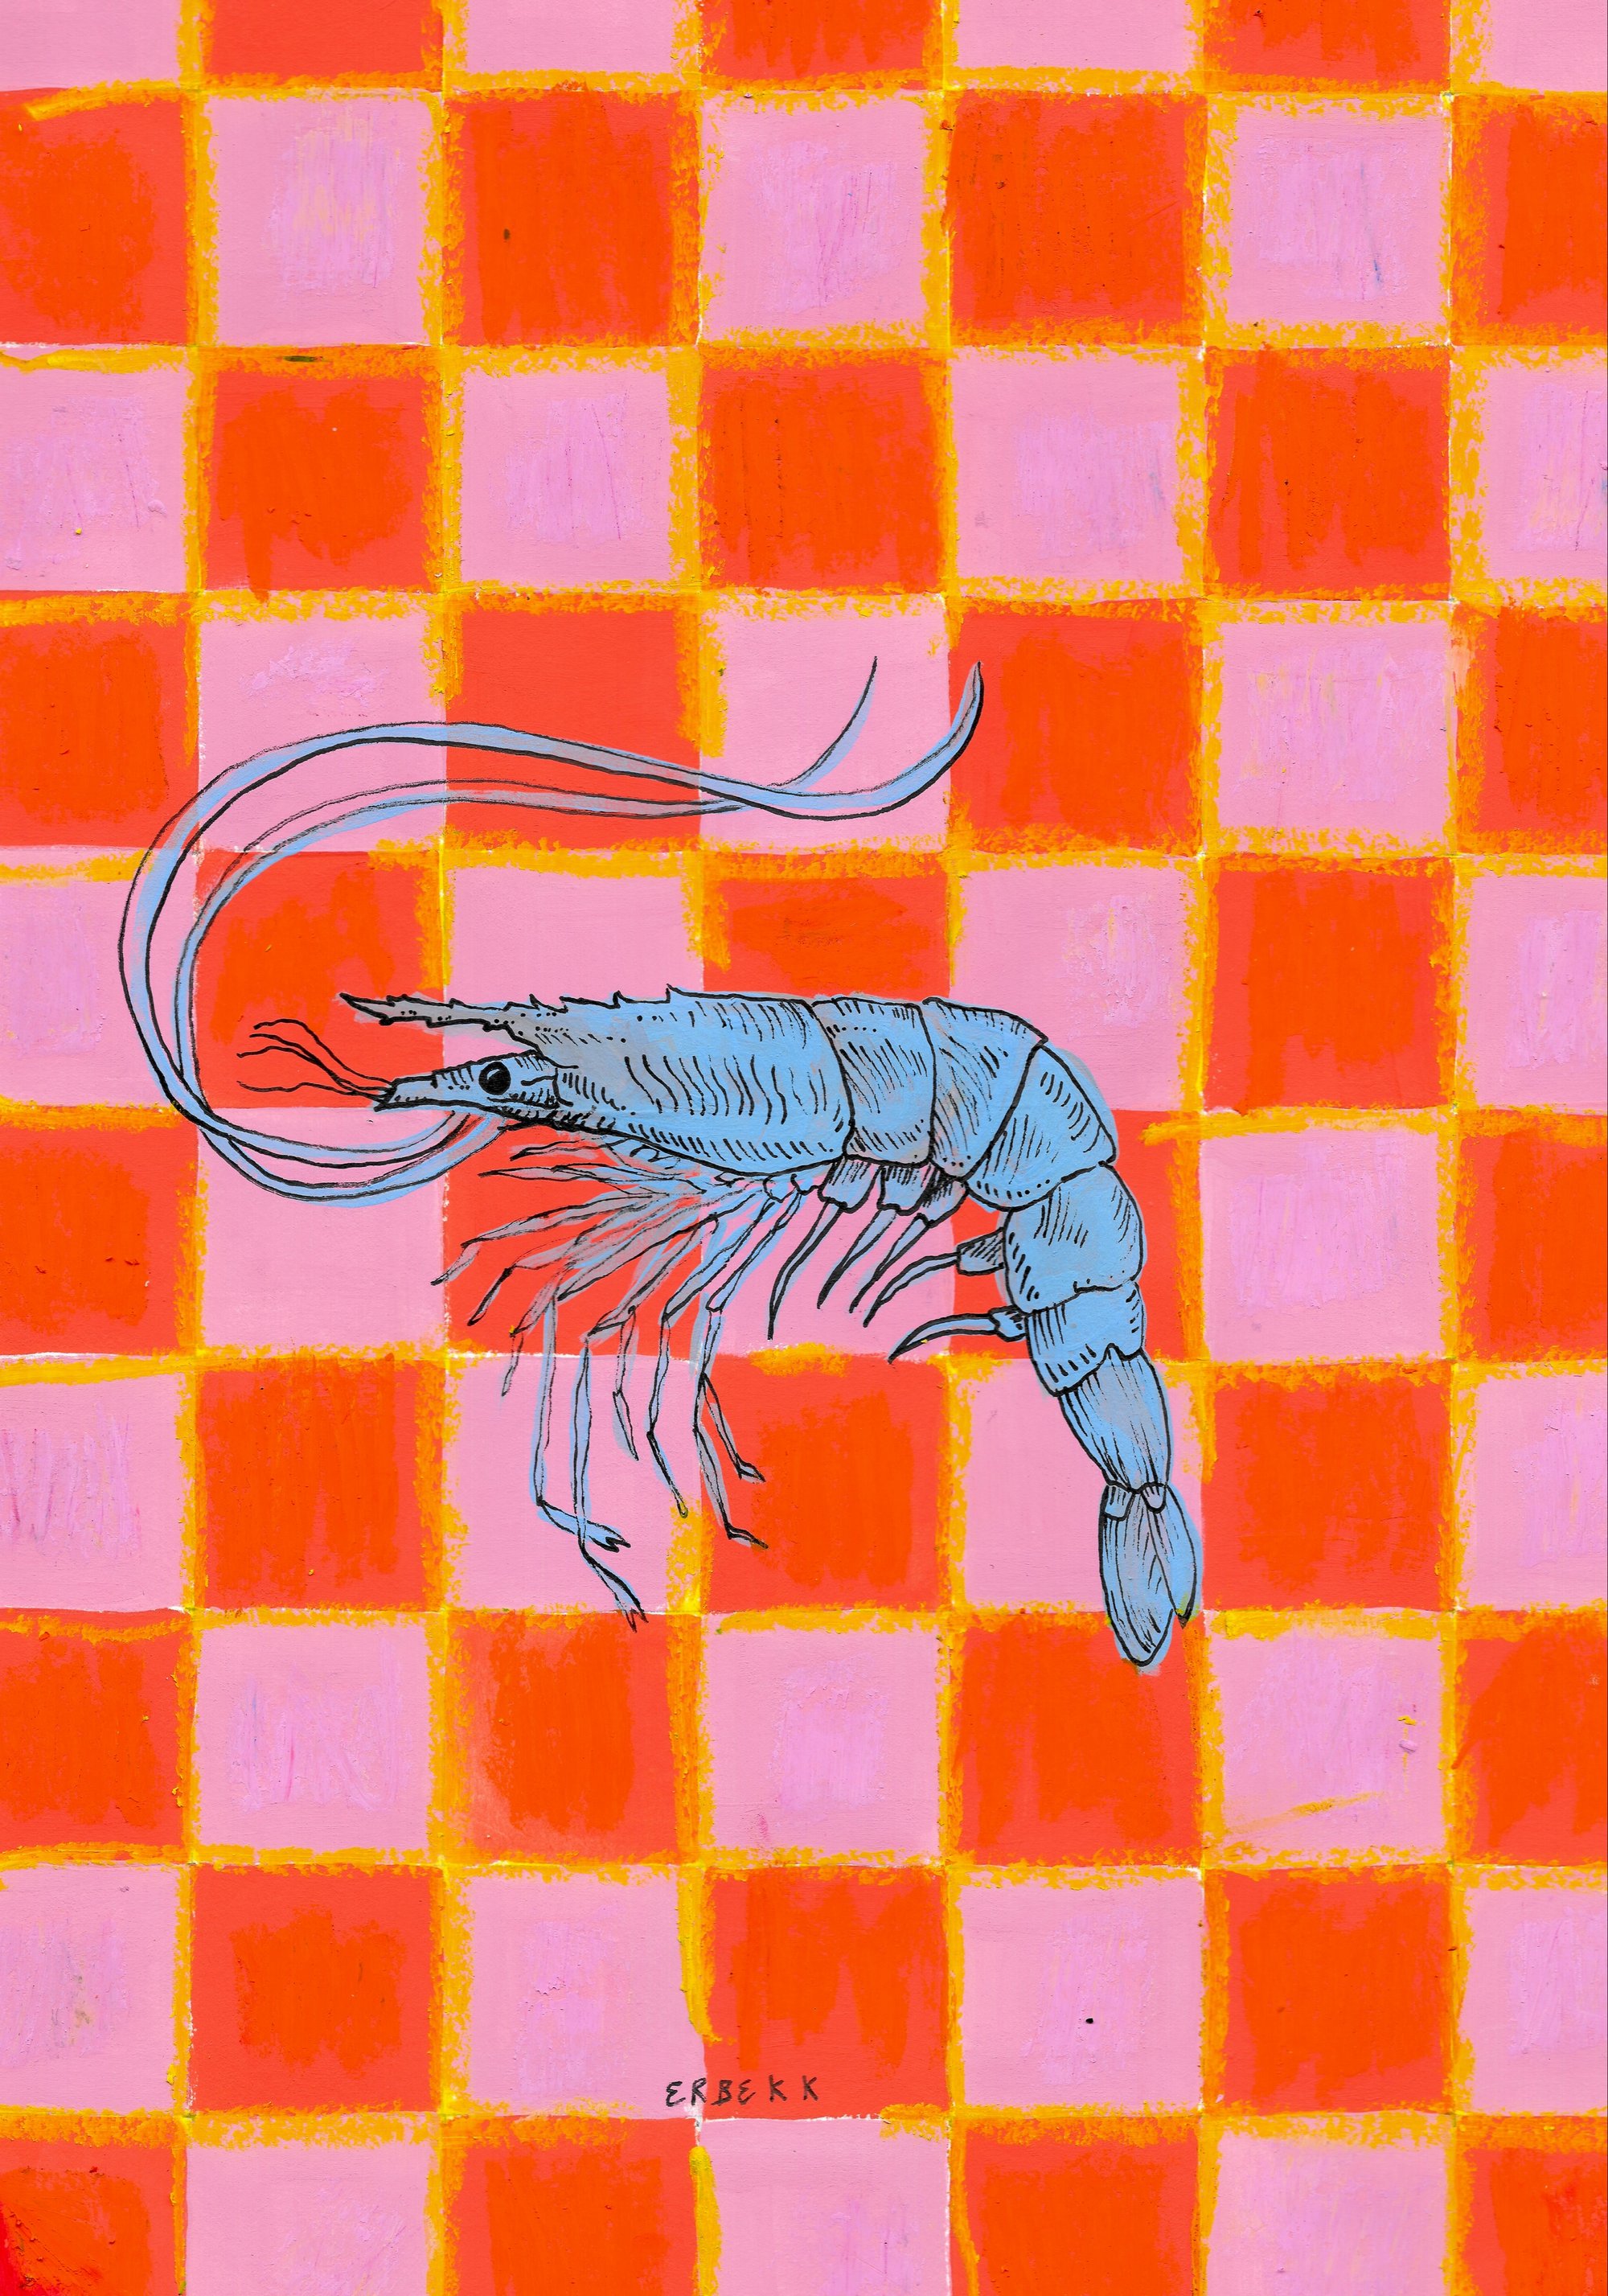 Image of Essential tremor and the shrimp